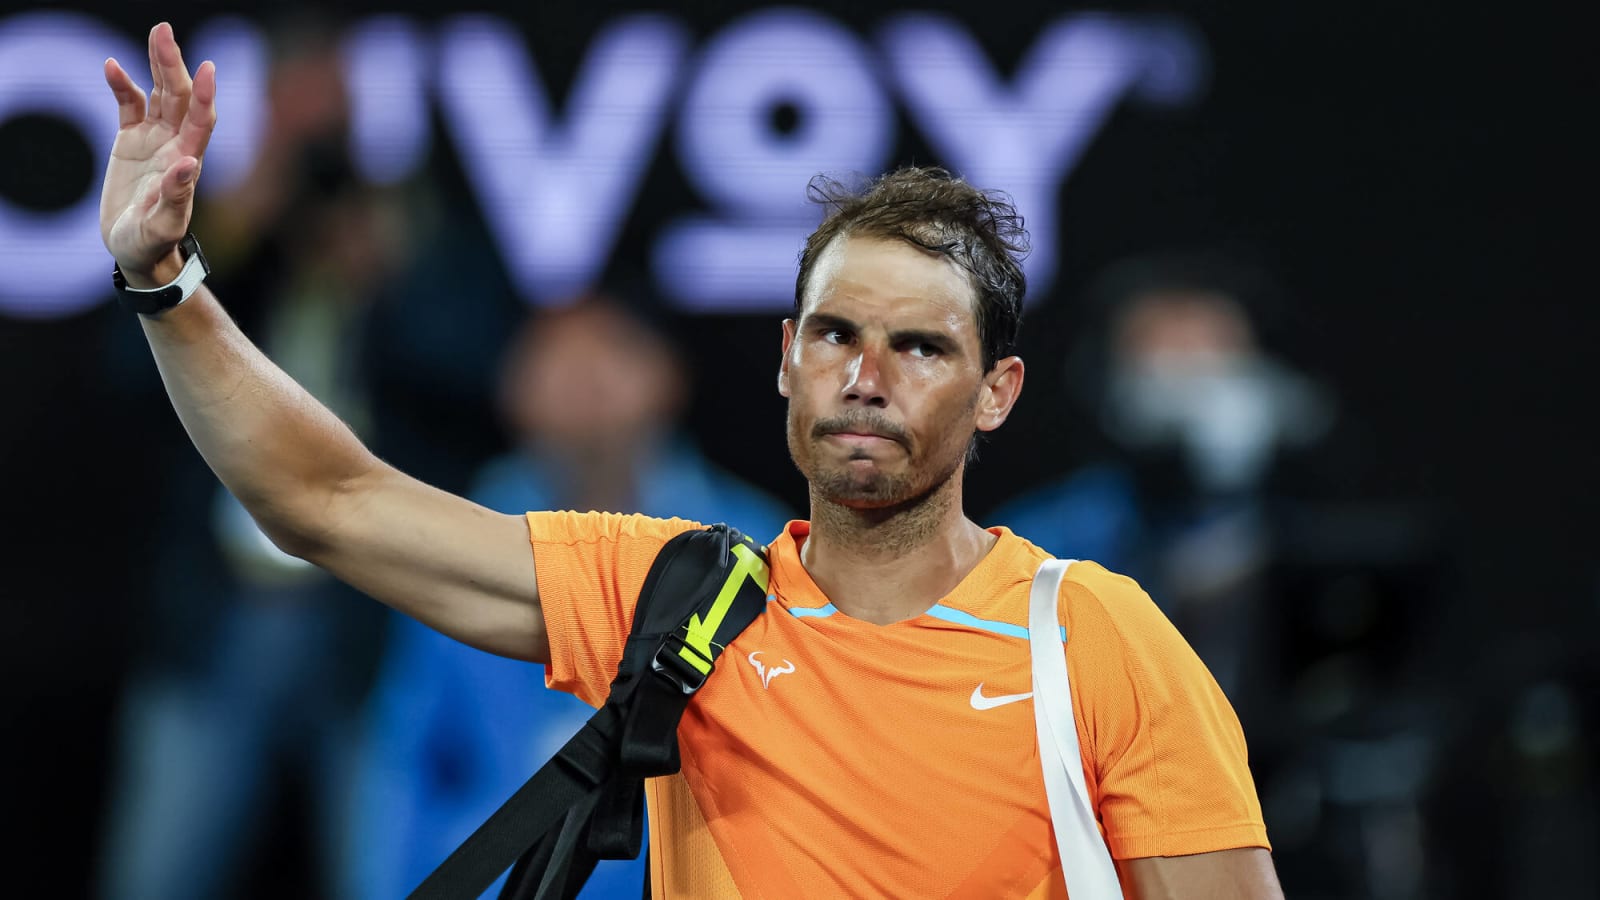 'I can’t give you an update on injuries,' Rafael Nadal refuses to discuss his long list of physical challenges that impede his return as he promises to show up in Barcelona